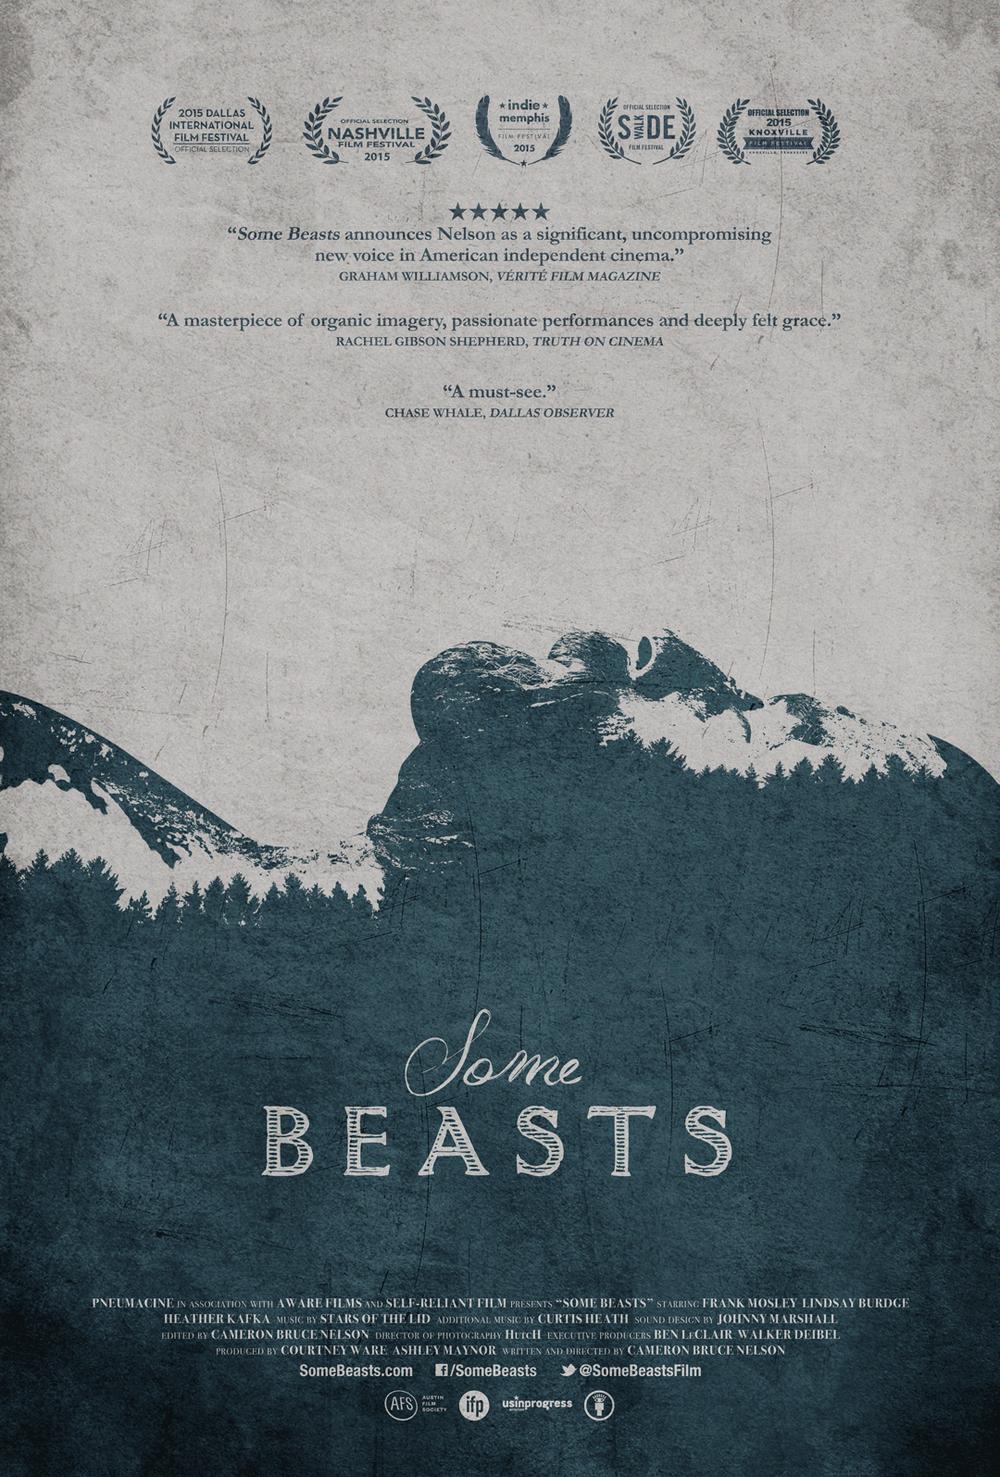 Some Beasts (2015) starring Frank Mosley on DVD on DVD